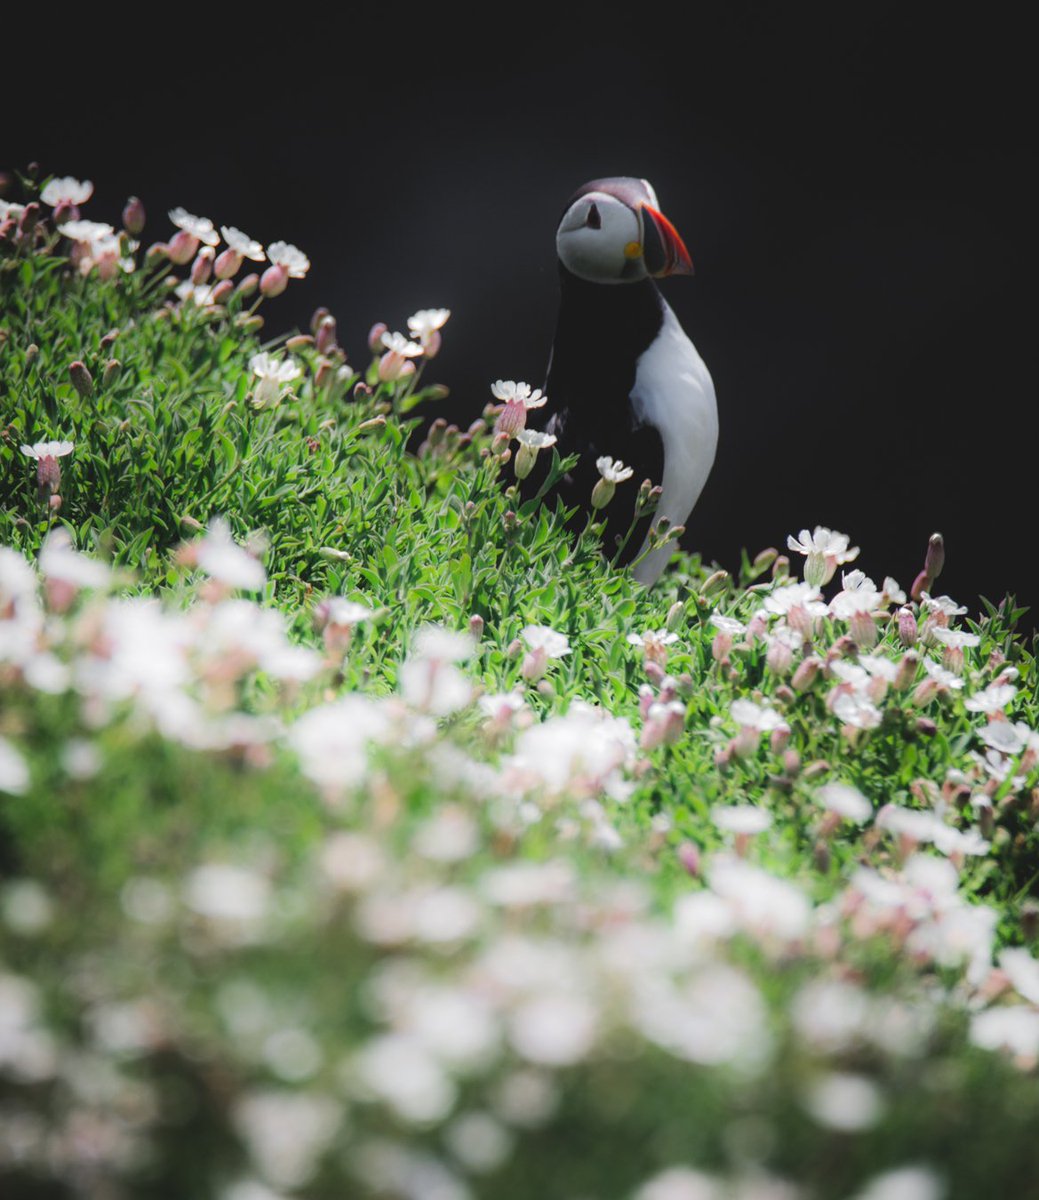 Some #SalteeIsland puffins from a couple of weekends ago! 

#photography #wildlife #birds #ireland